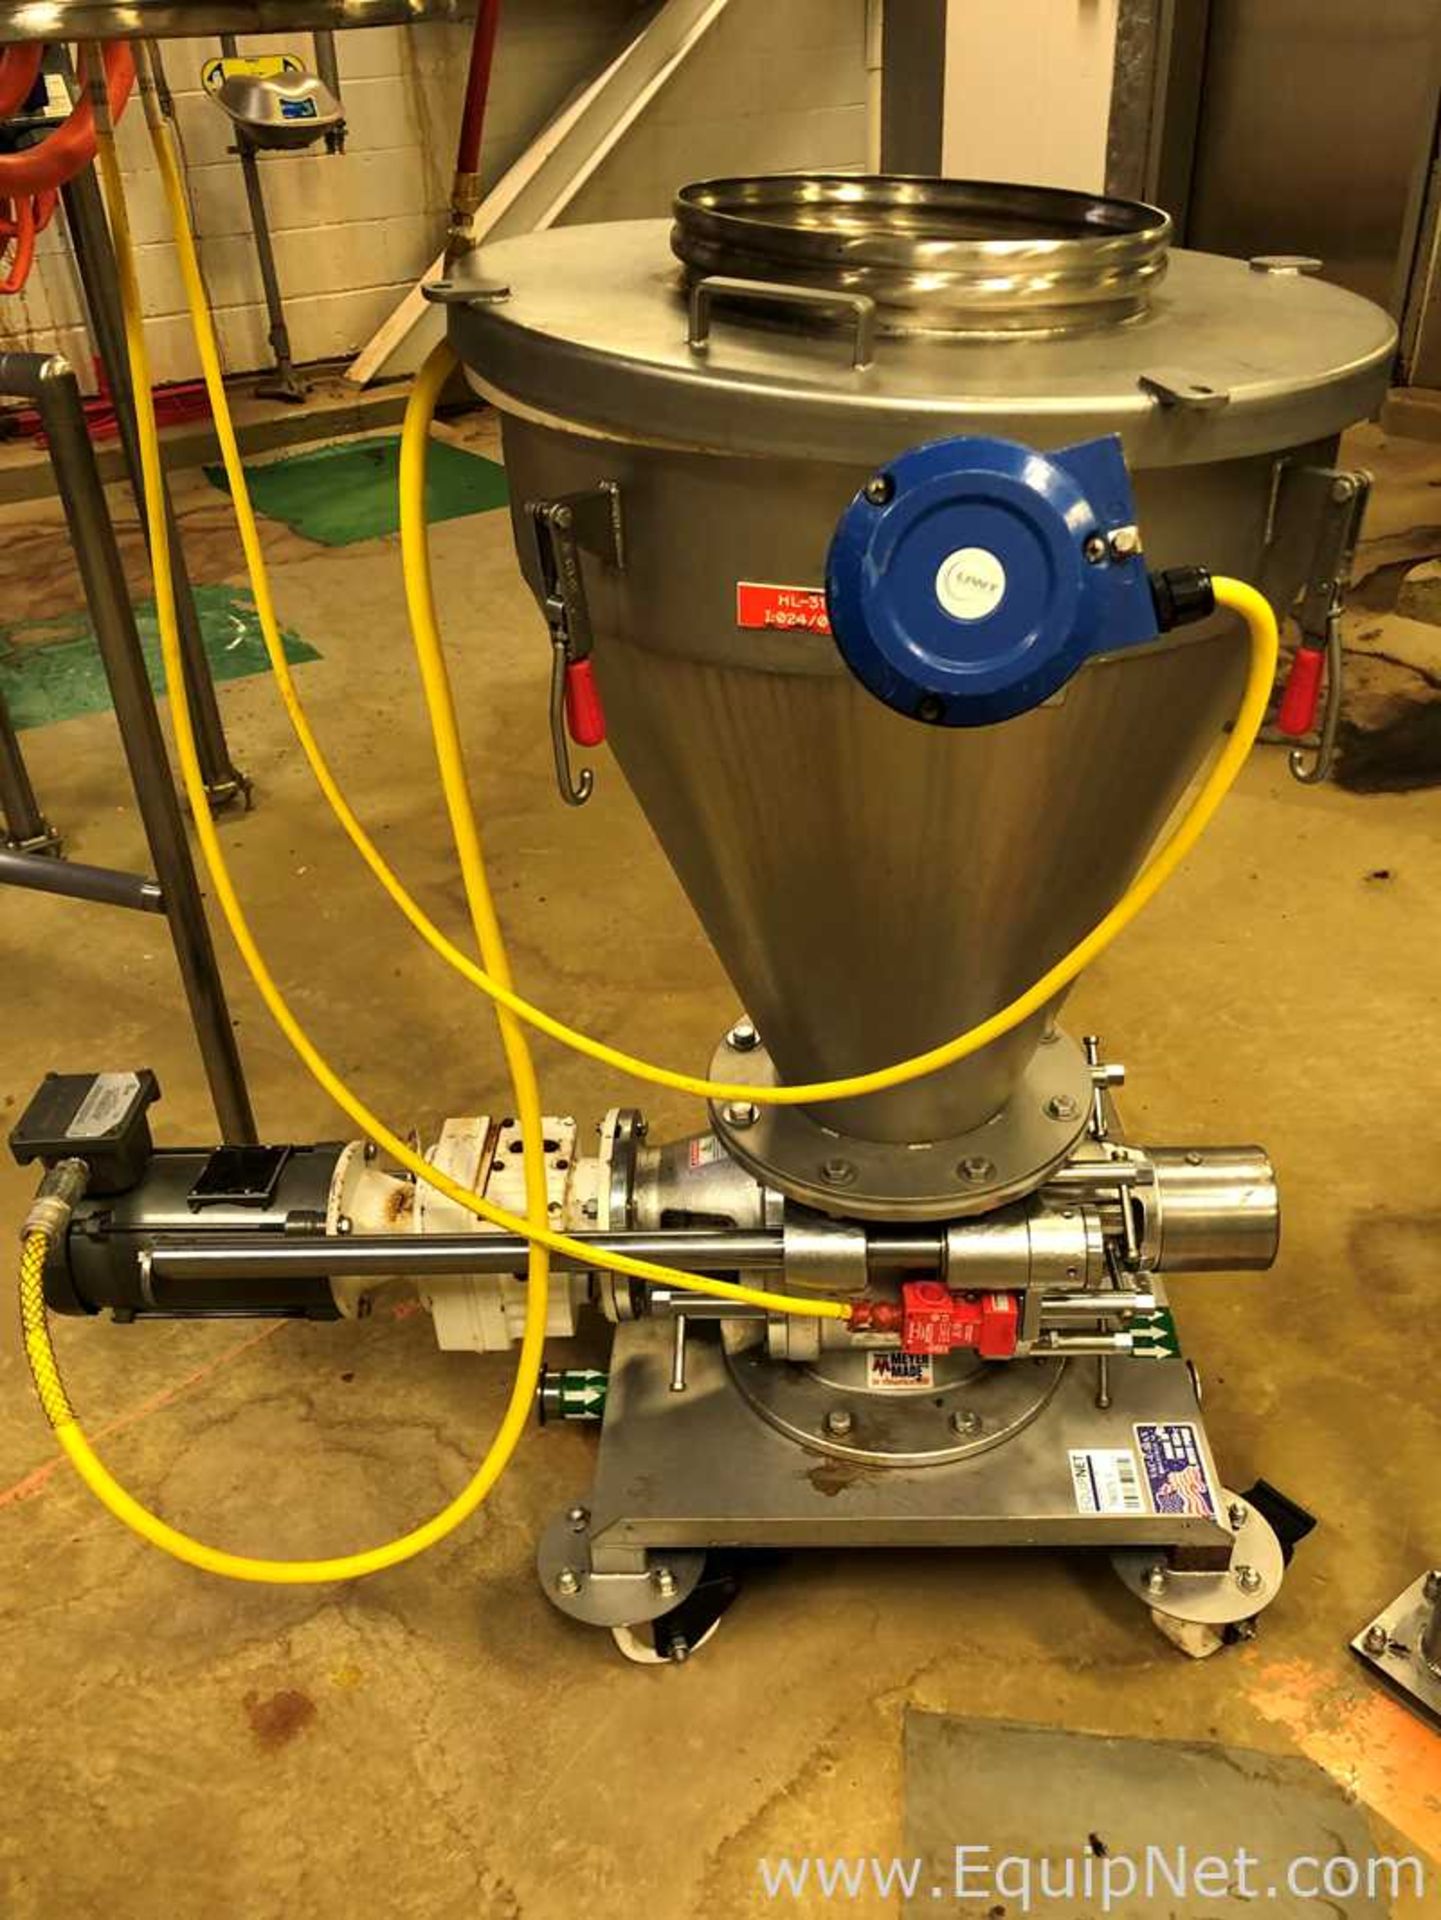 One Vacuum Conveyor System Vac-U-Max With Hopper And One Shick S-225-1 Rotary Valve - Image 2 of 14